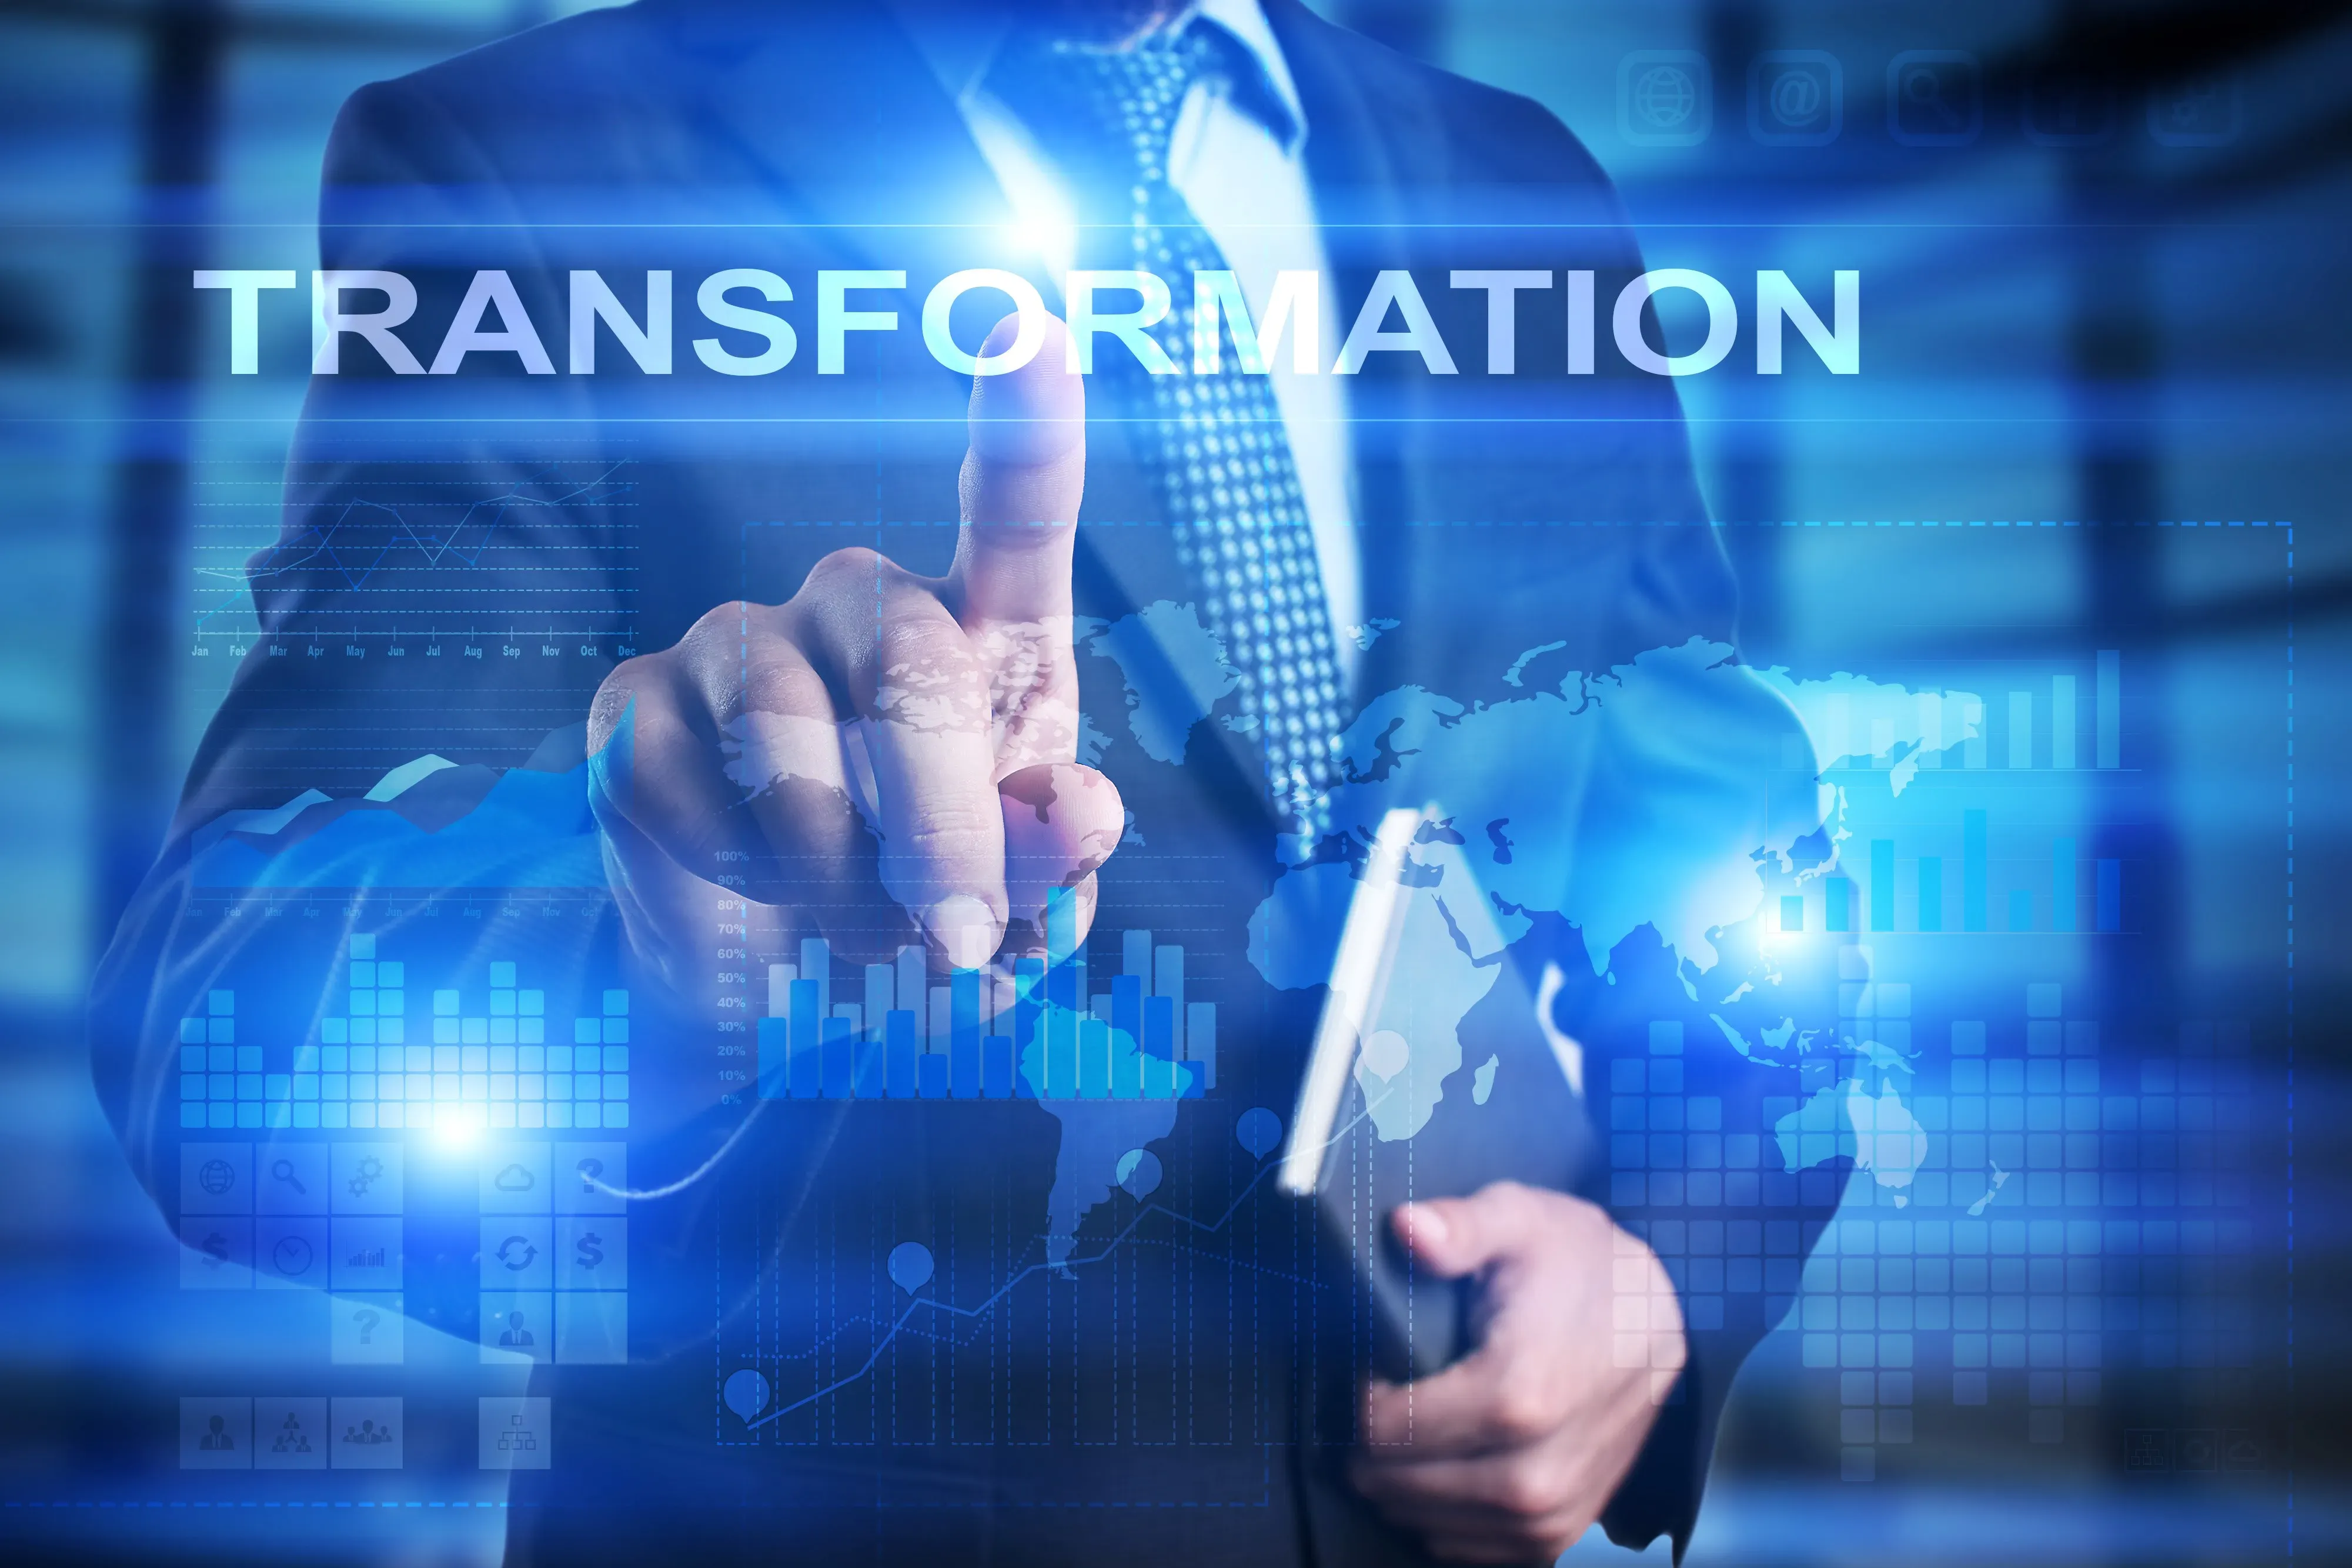 Human Investment Series â€“ The New HR Transformation Model